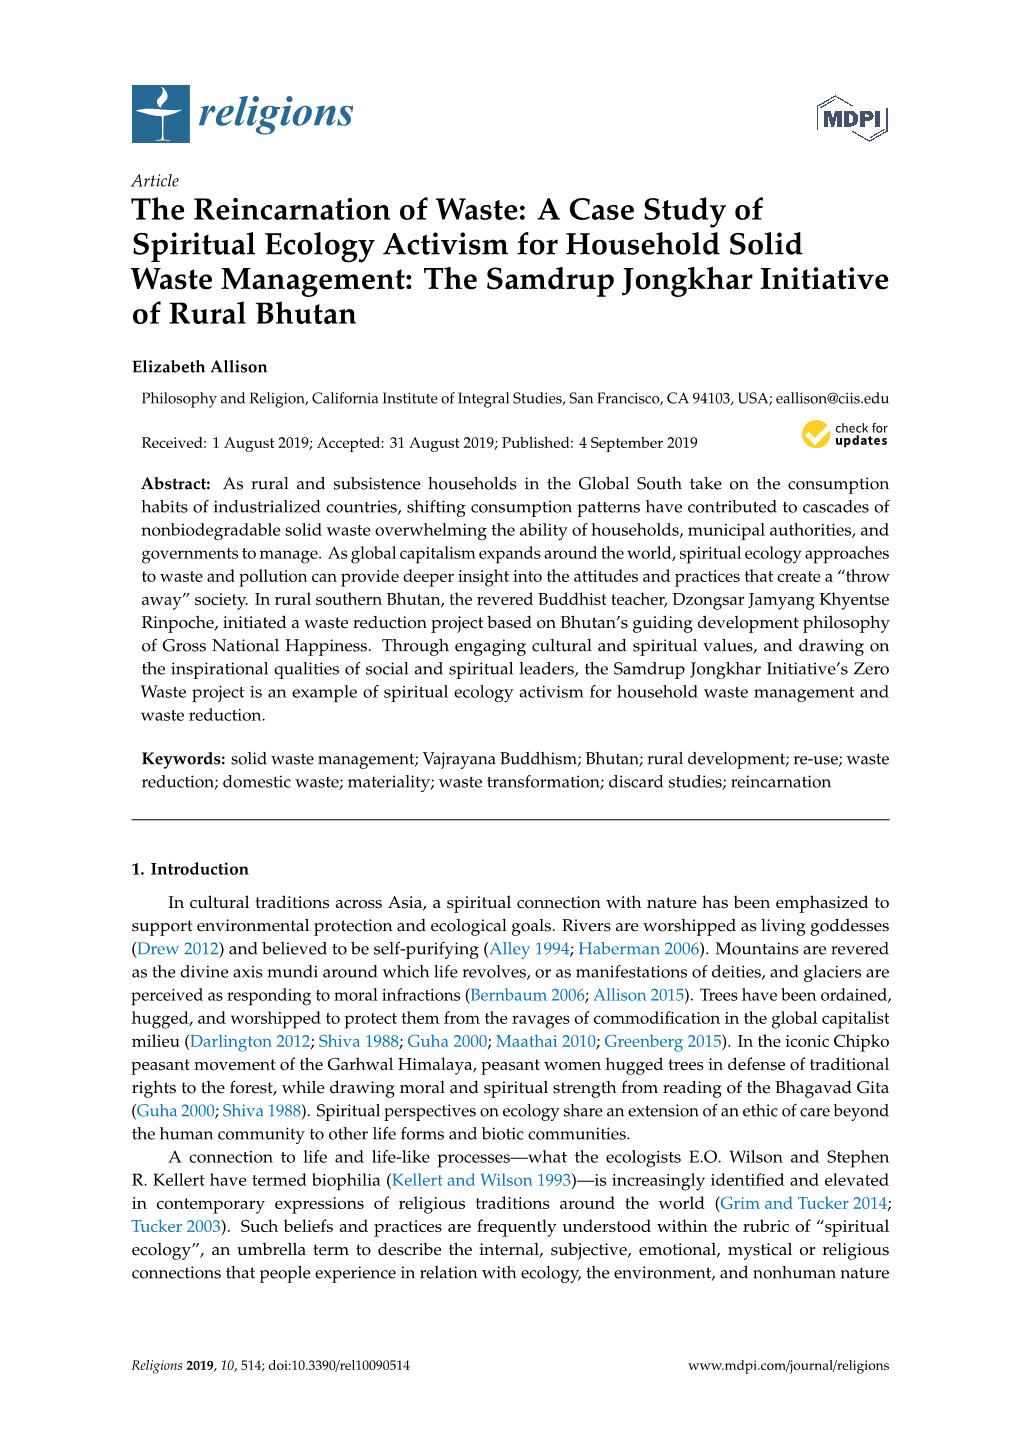 A Case Study of Spiritual Ecology Activism for Household Solid Waste Management: the Samdrup Jongkhar Initiative of Rural Bhutan